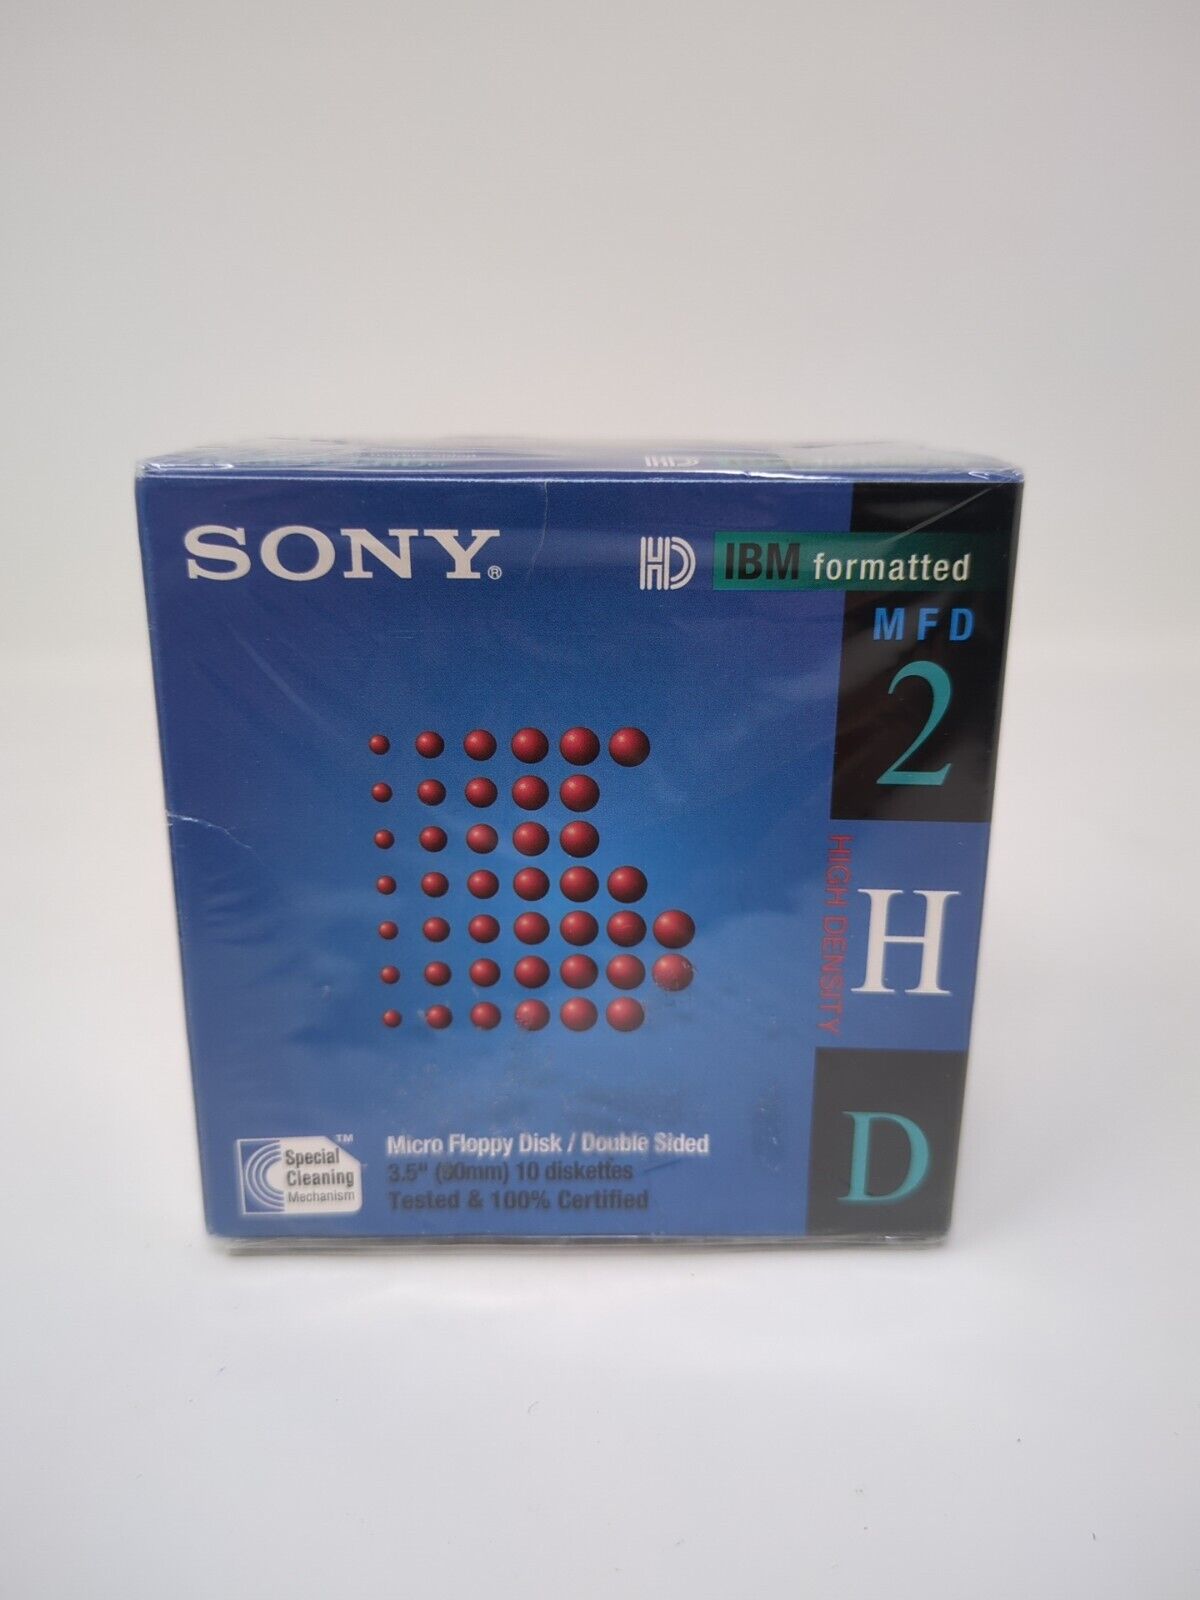 Sony | 3.5” High Density Micro Floppy Disc MFD 2HD 1.44MB | 10 Pack | SEALED NEW